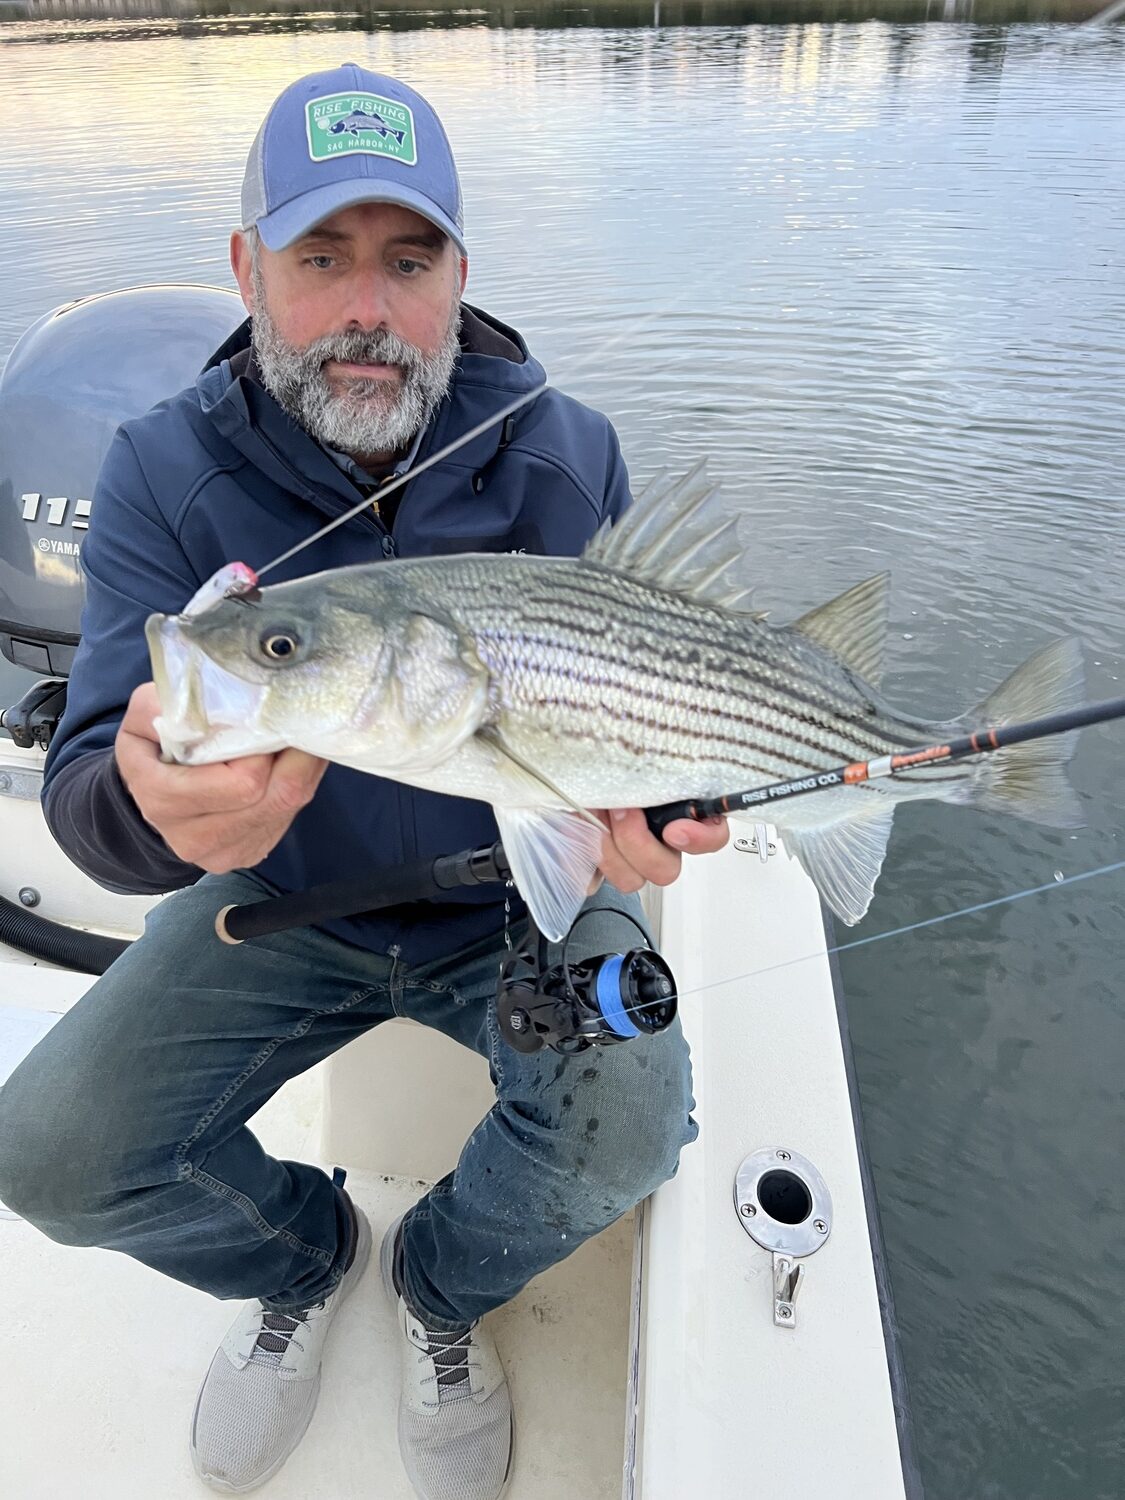 Steve Bechard is a fly casting instructor and owner of Rise Fishing, a Sag Harbor-based company that manufactures fly rods and light spinning rods.